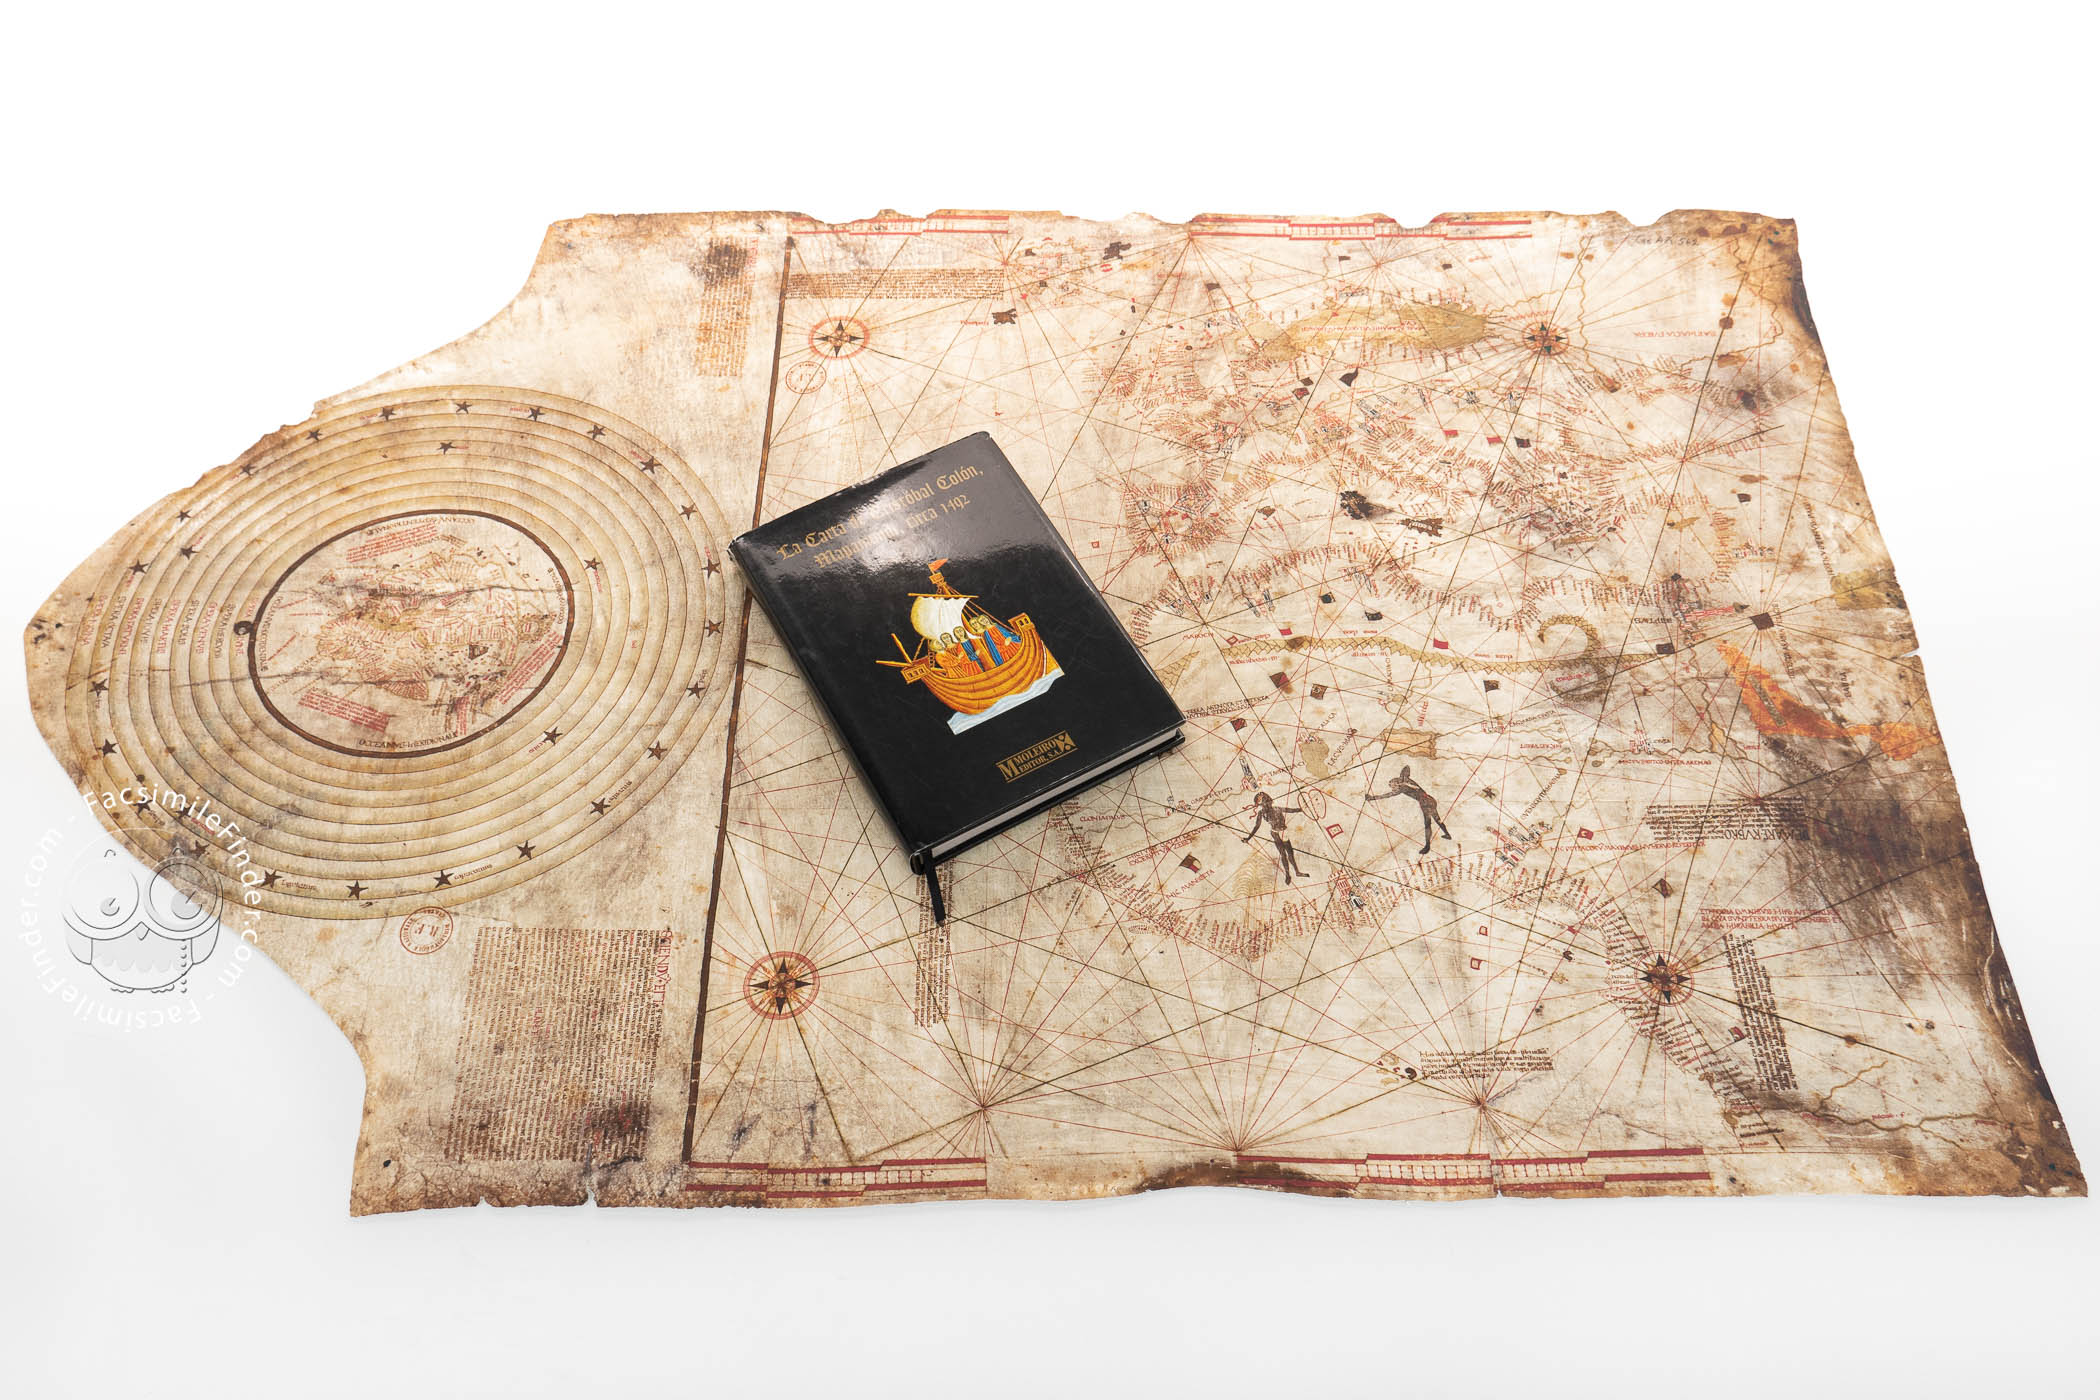 Mapa Mundi contemplating the three countries depicted in this work: A